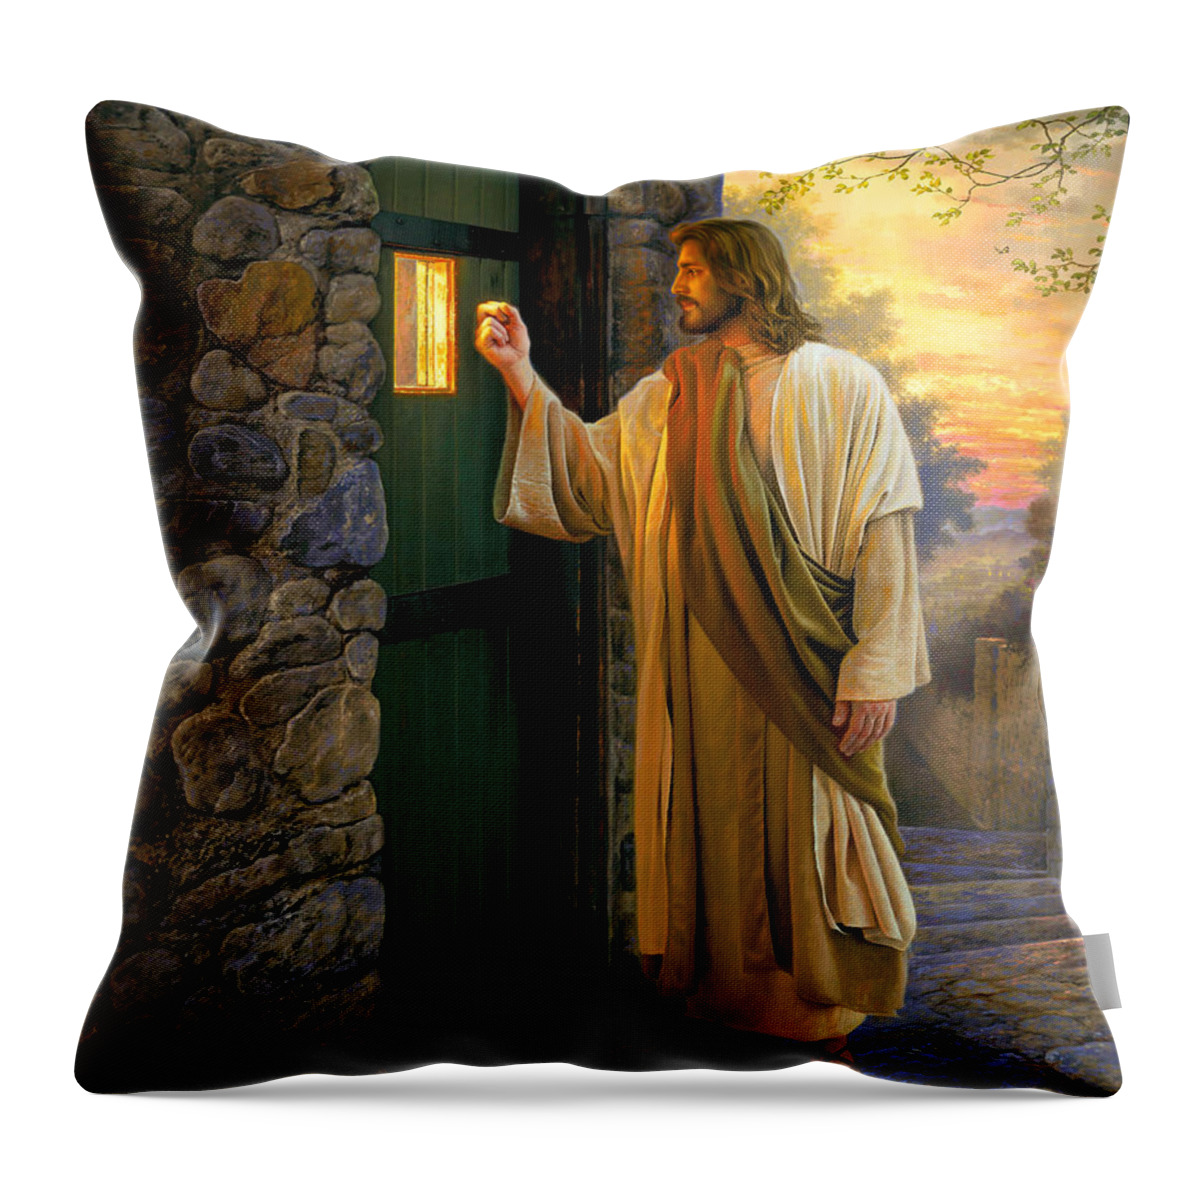 Jesus Throw Pillow featuring the painting Let Him In by Greg Olsen